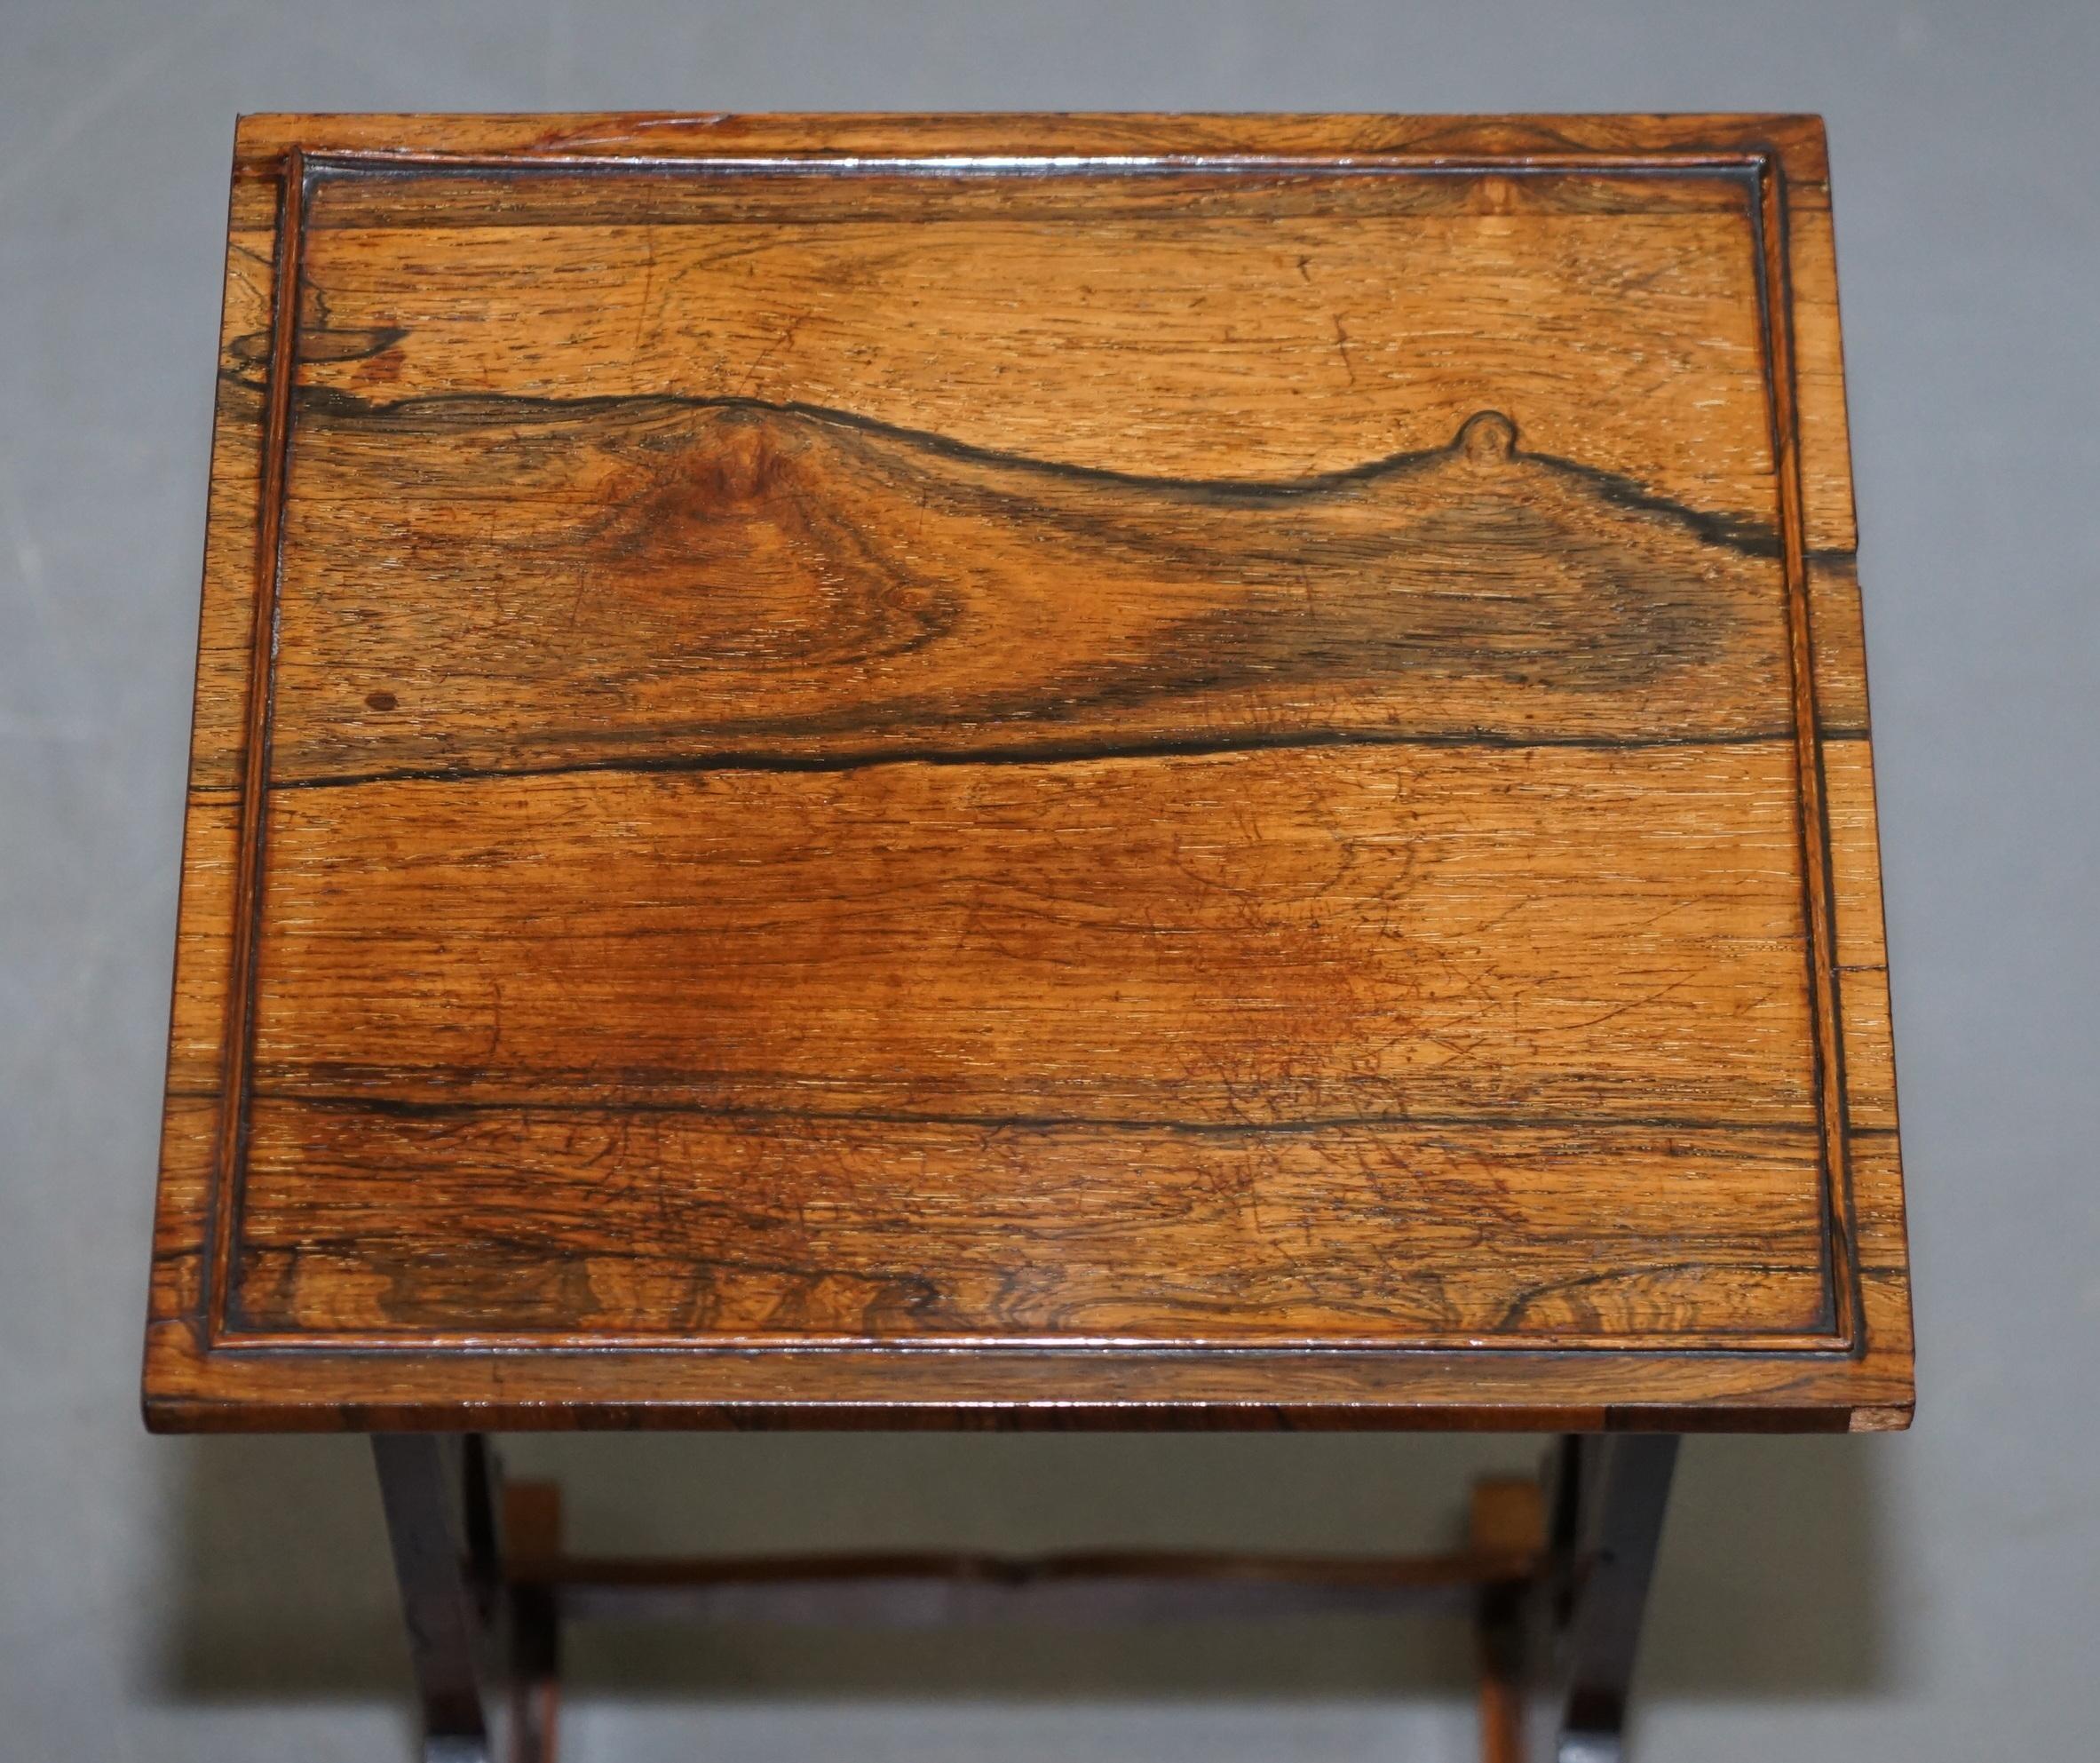 Fine Regency Nest of Hardwood Tables with Chessboard Top Attributed to Gillows For Sale 15